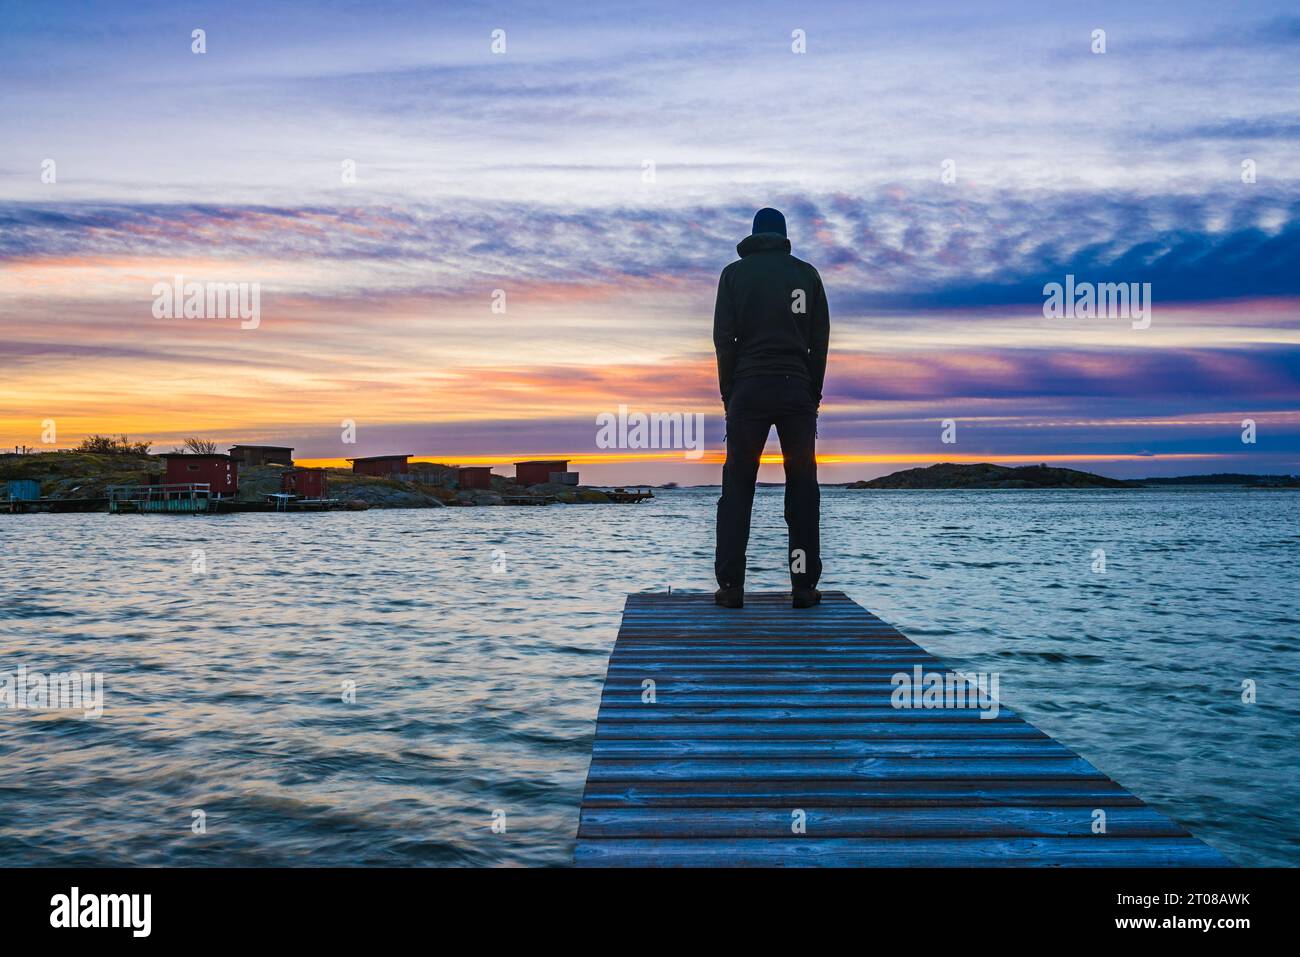 A person standing on a pier at sunset, admiring the beautiful ocean. Stock Photo